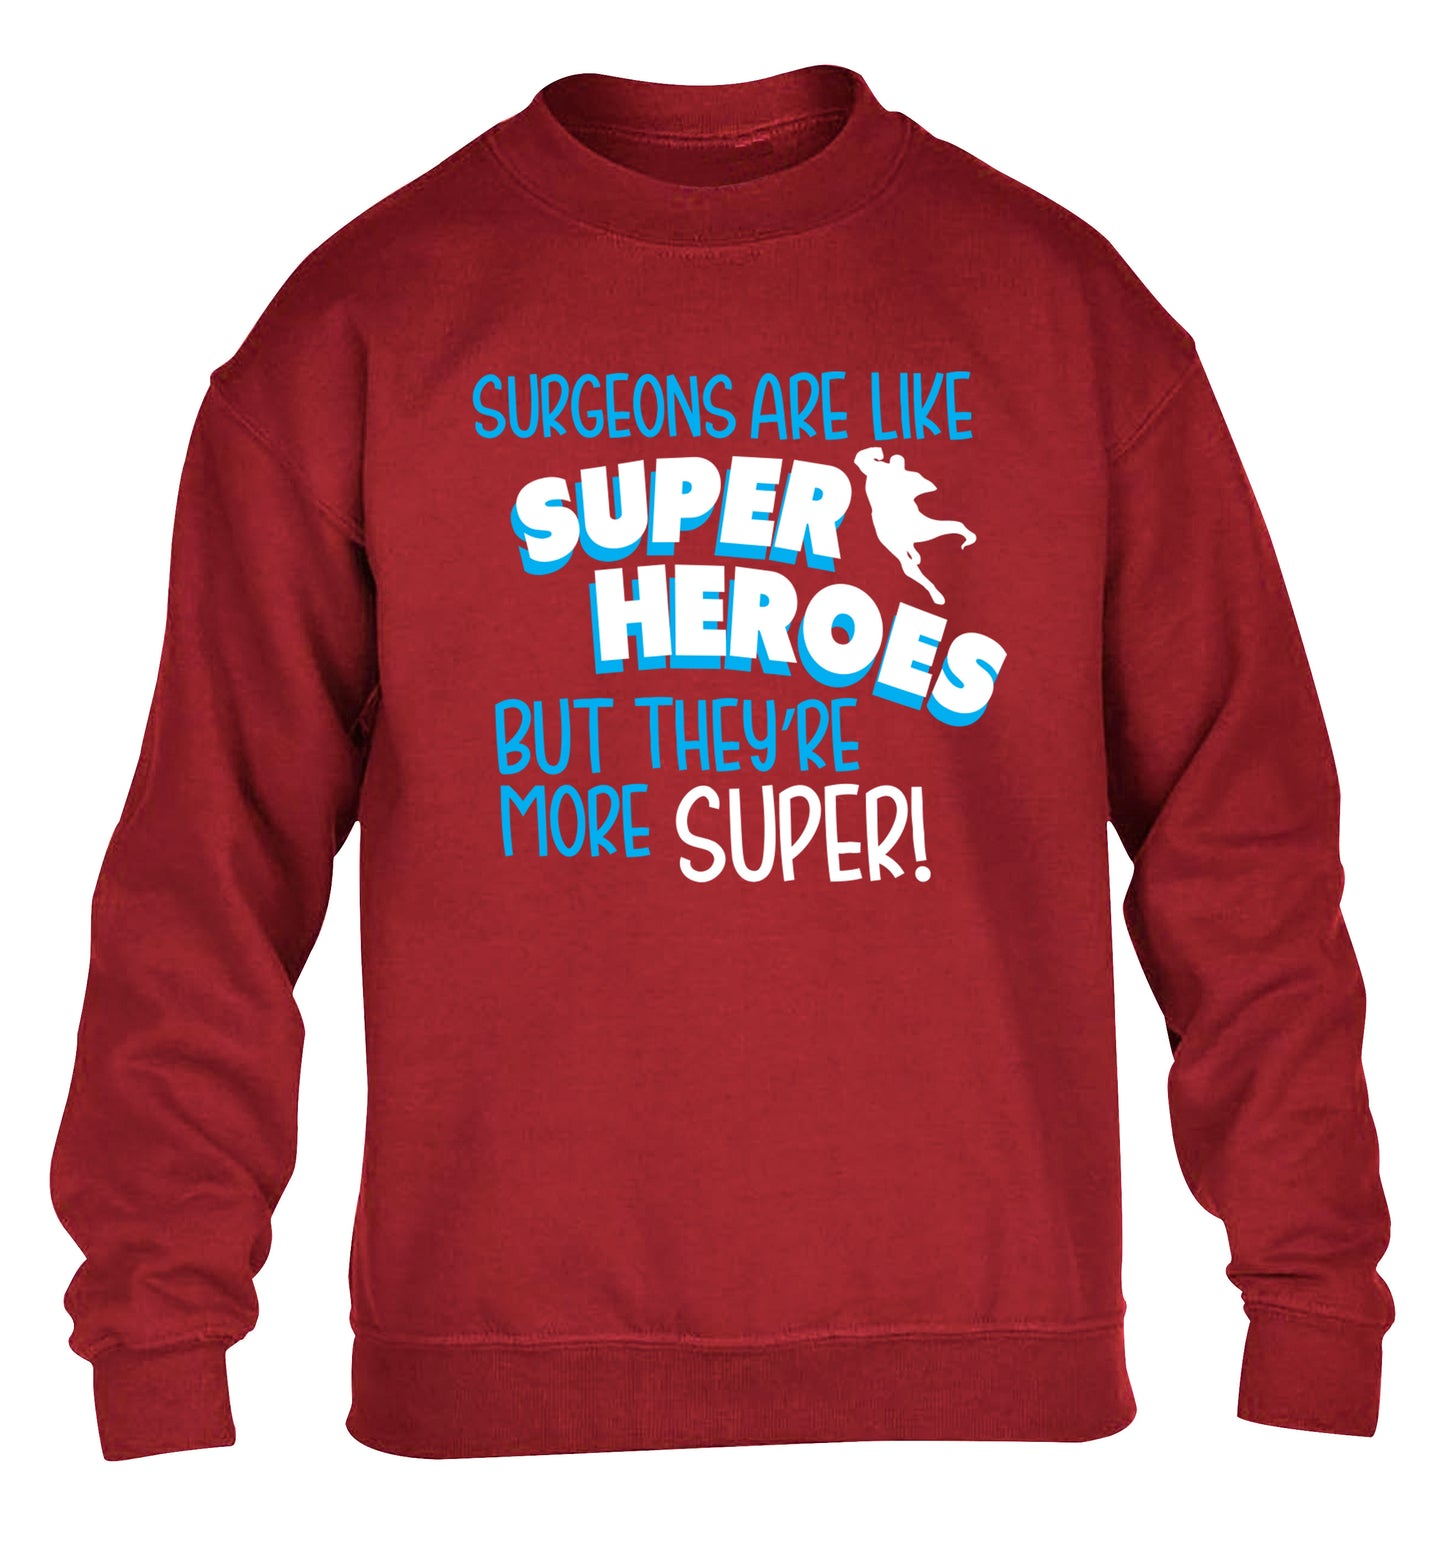 Surgeons are like superheros but they're more super children's grey sweater 12-13 Years